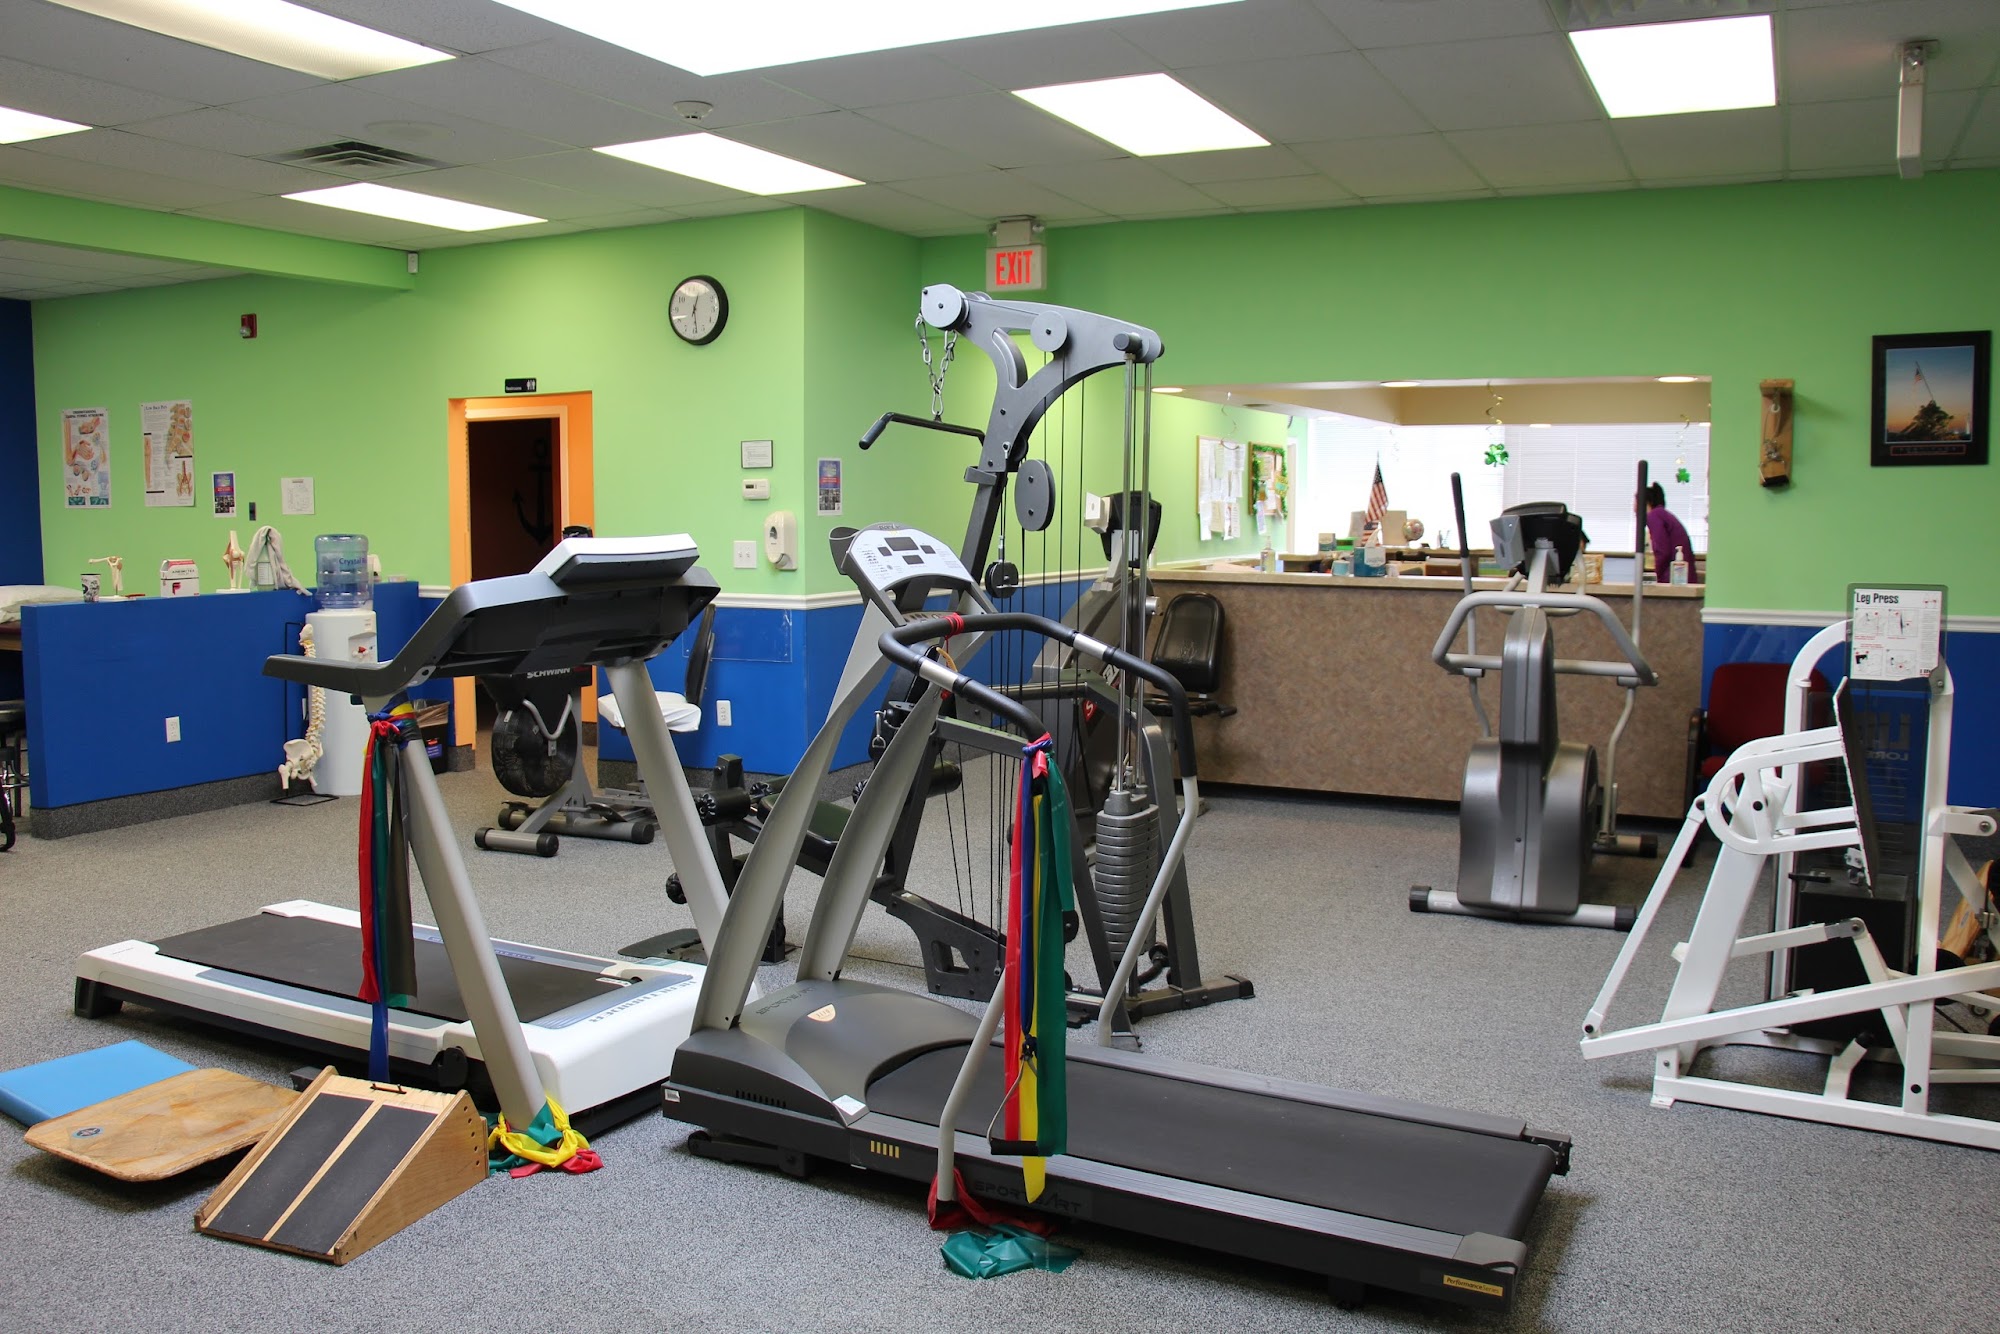 Madison Spine & Physical Therapy